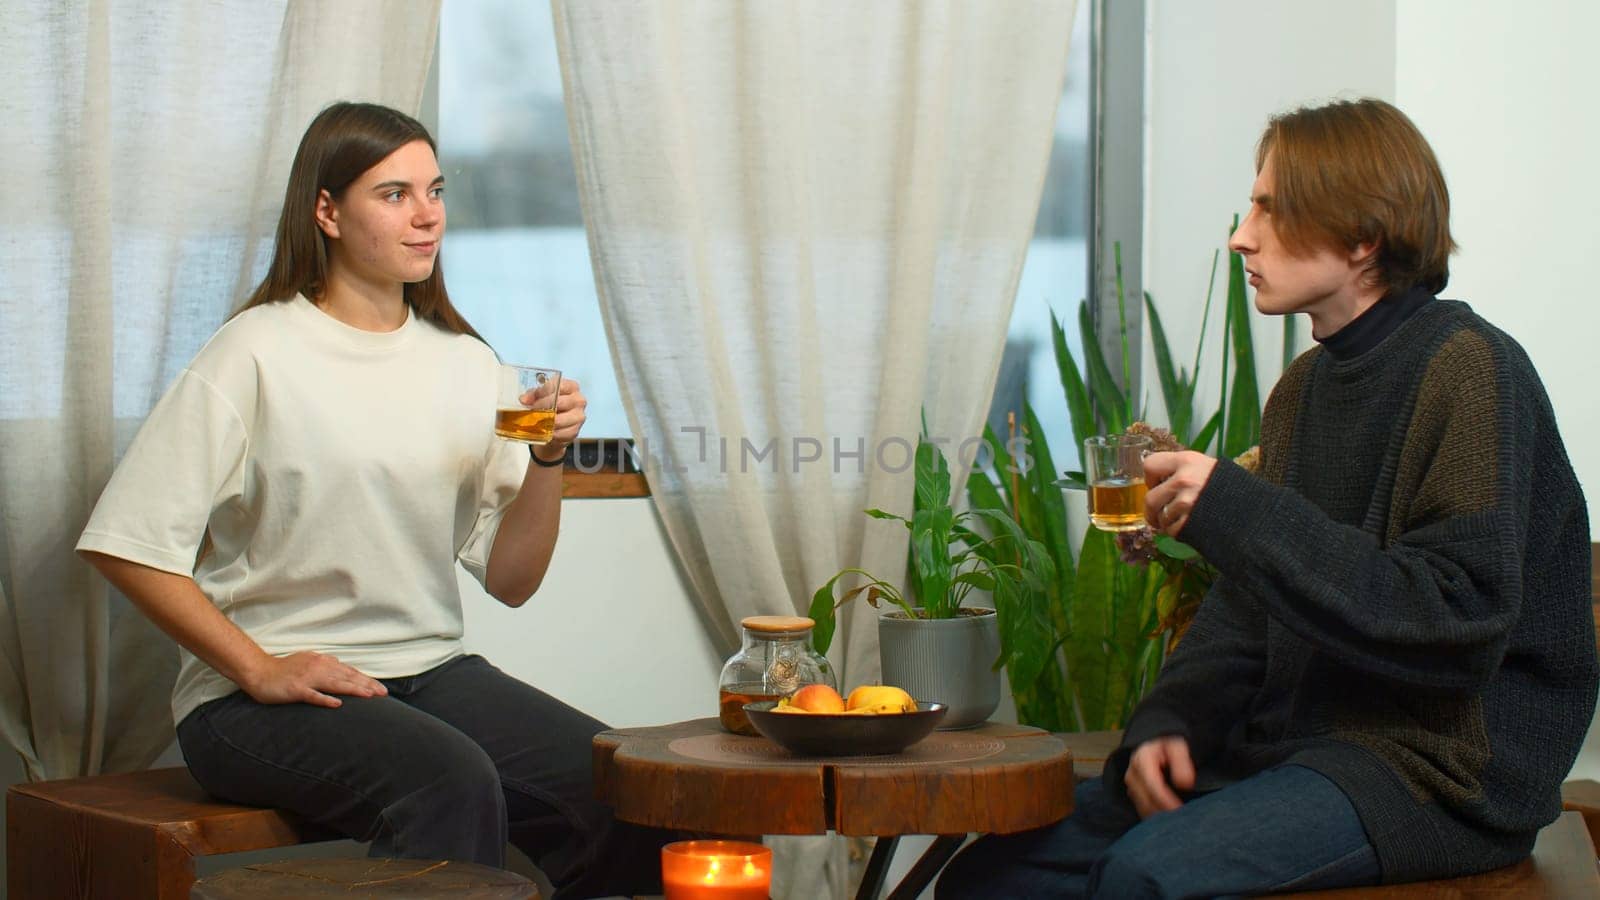 Students communicate and drink tea in cafe. Media. Young man and woman are drinking tea and talking in cafe. Cheerful conversation between young couple of students in cozy cafe by Mediawhalestock